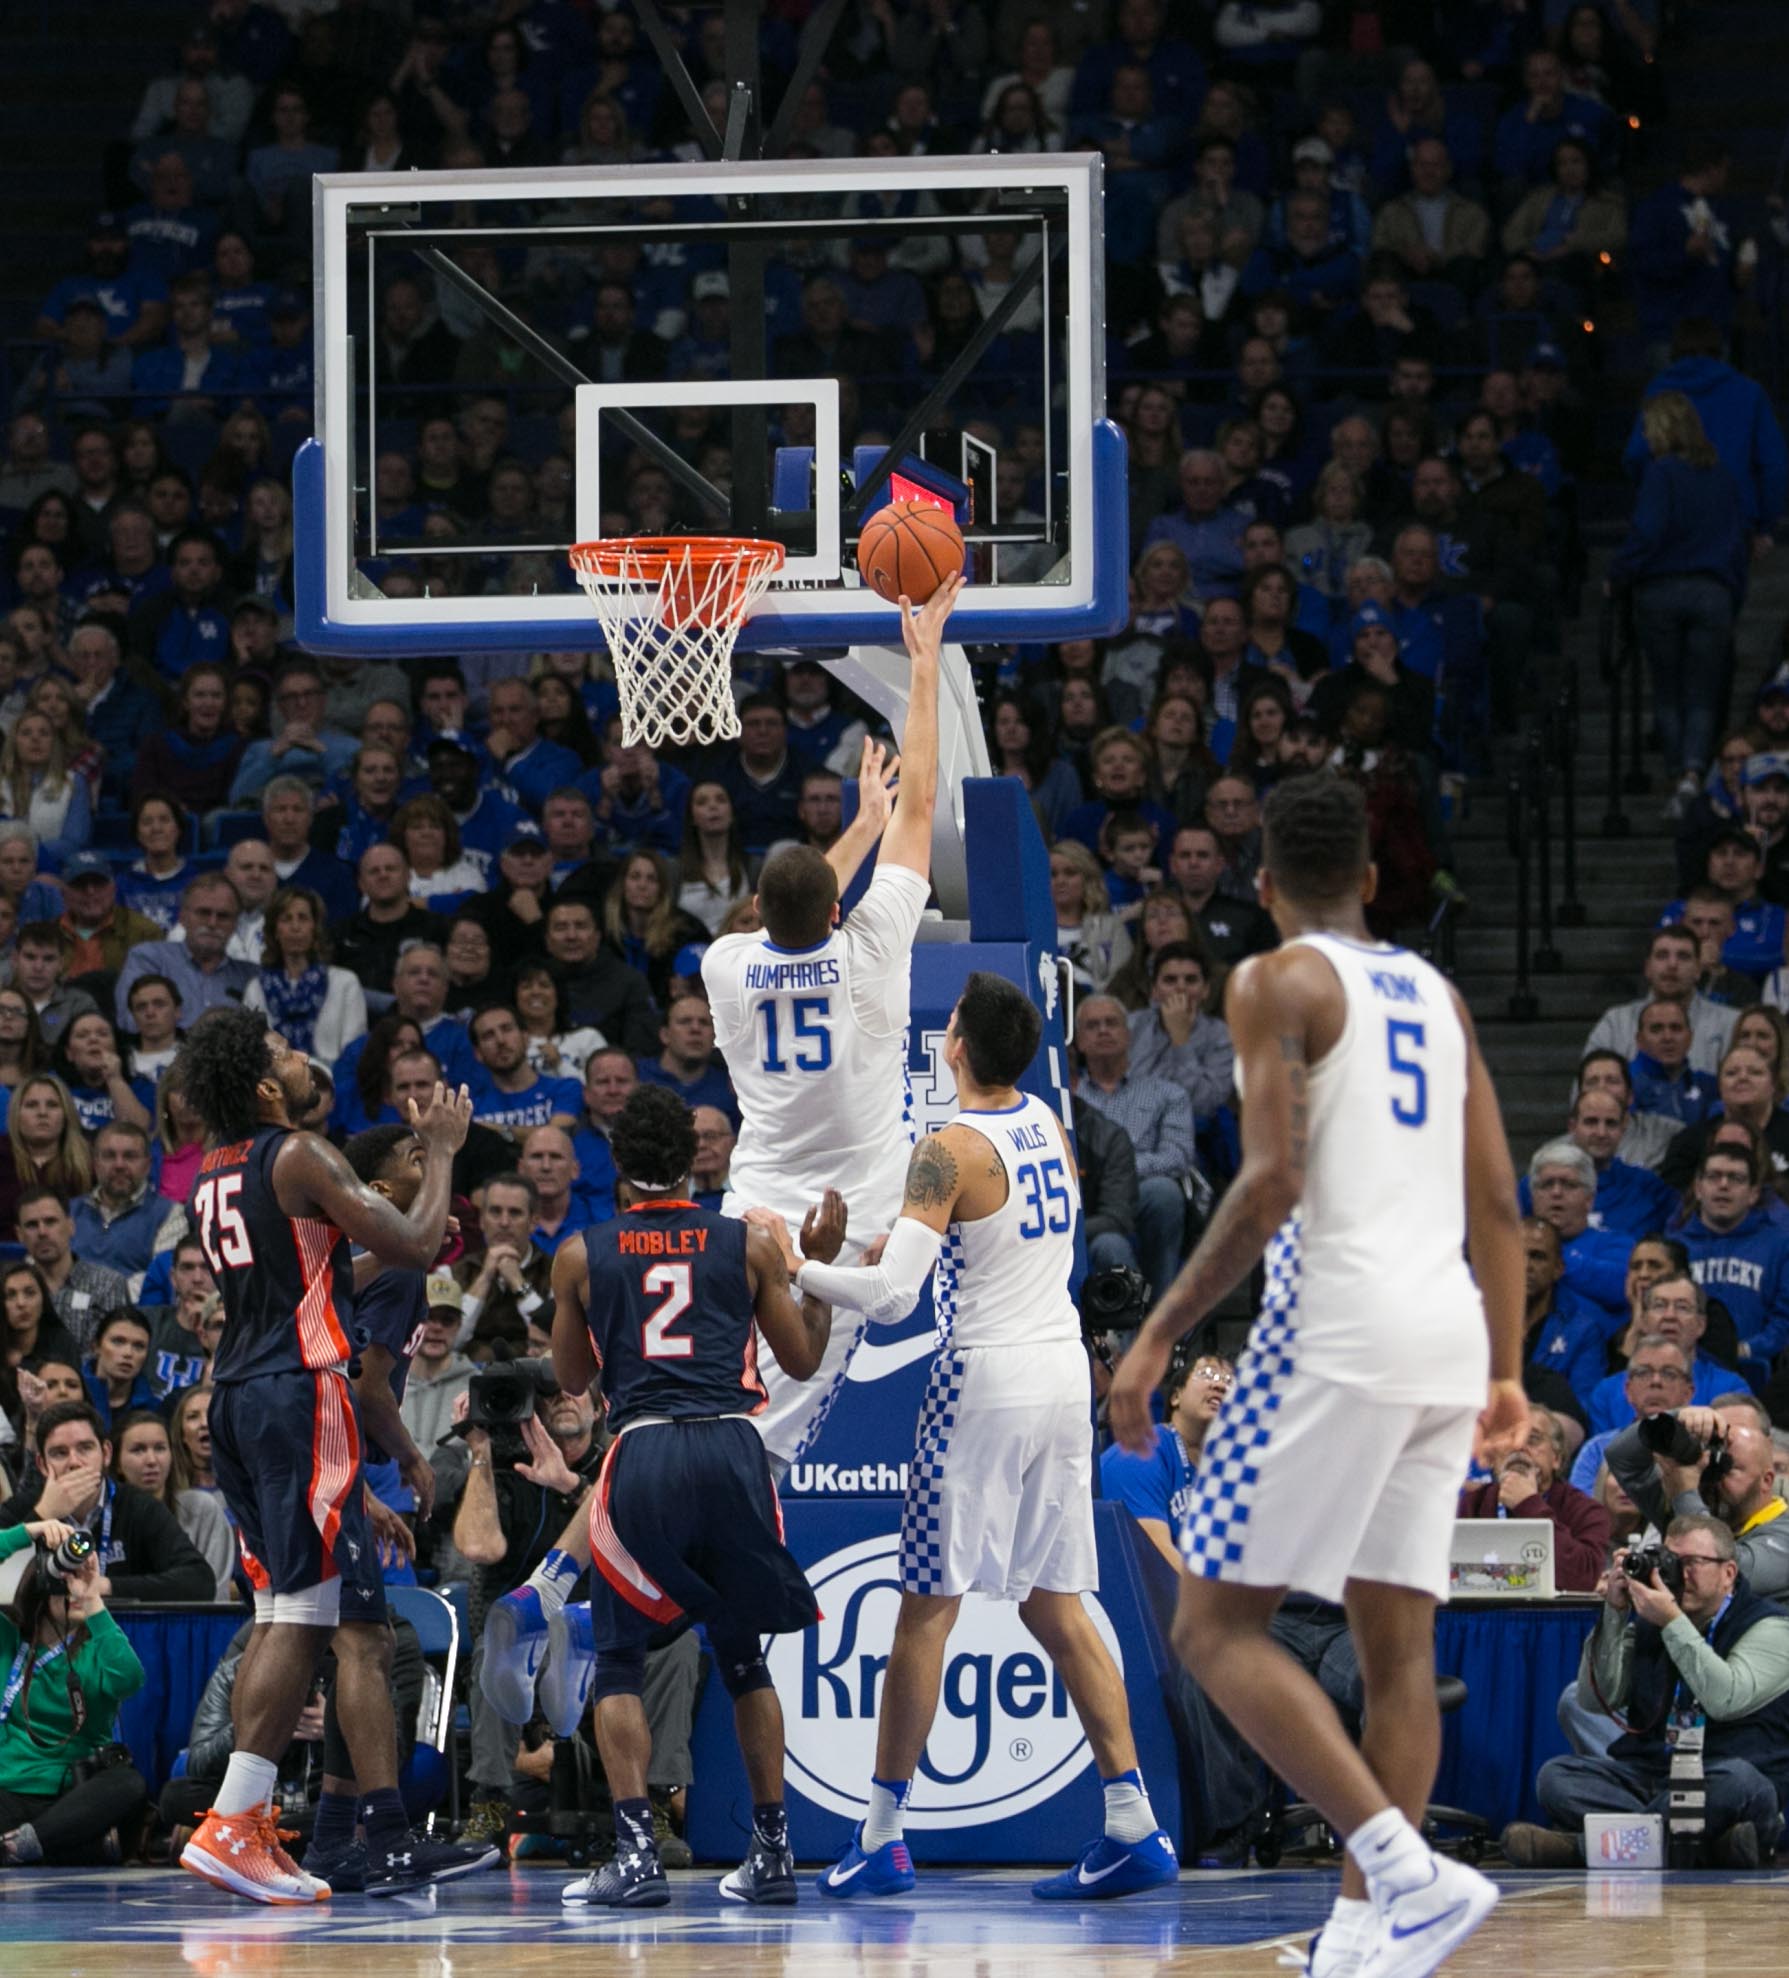 Humphries with the put back. Photo by Teresa Fraley